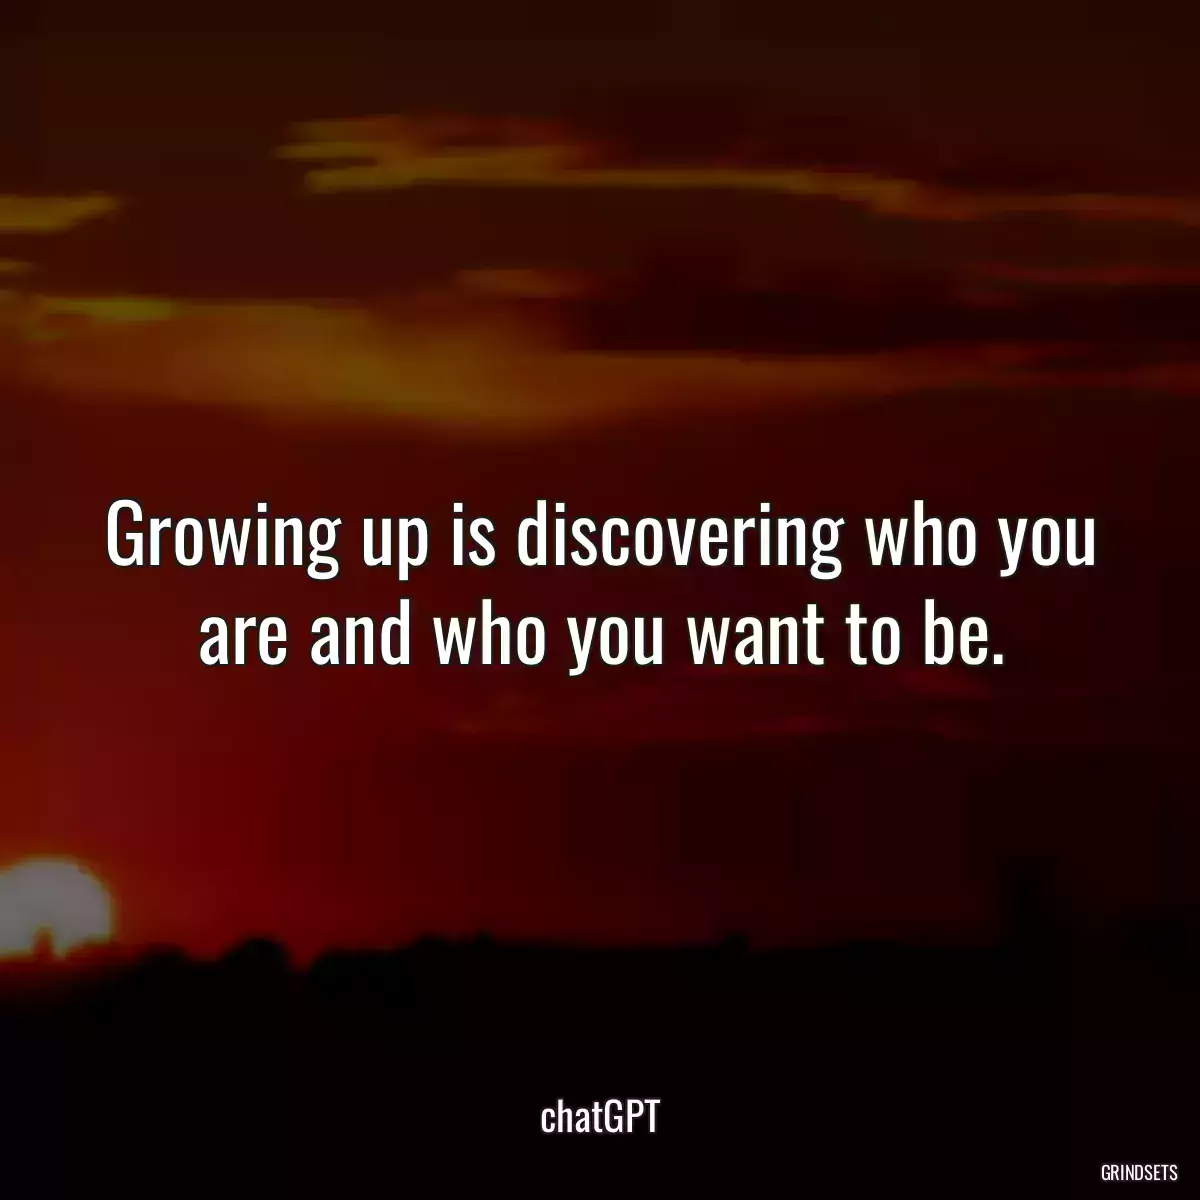 Growing up is discovering who you are and who you want to be.